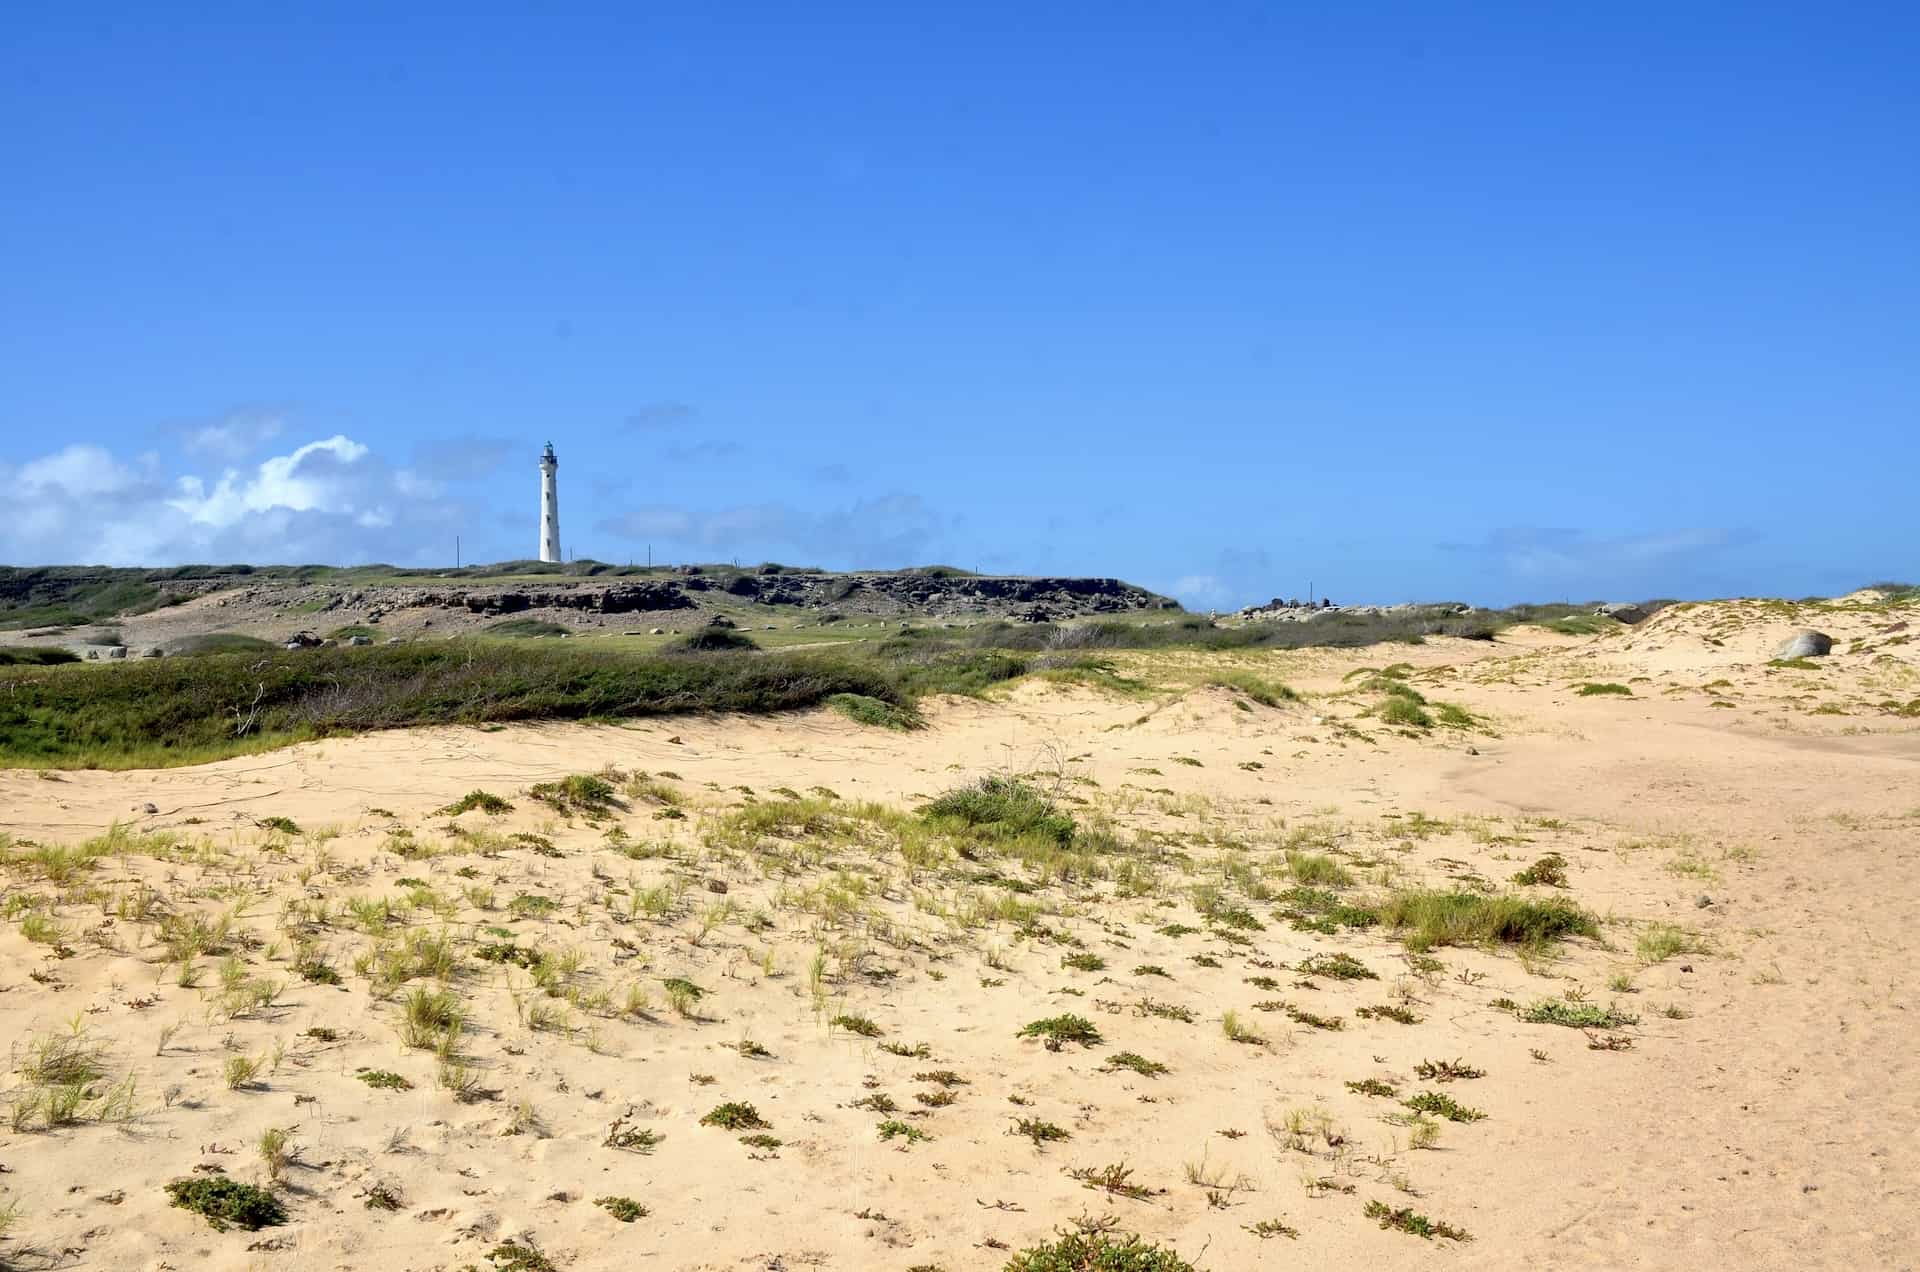 View of the California Lighthouse at the Sasarawichi Dunes in Noord, Aruba